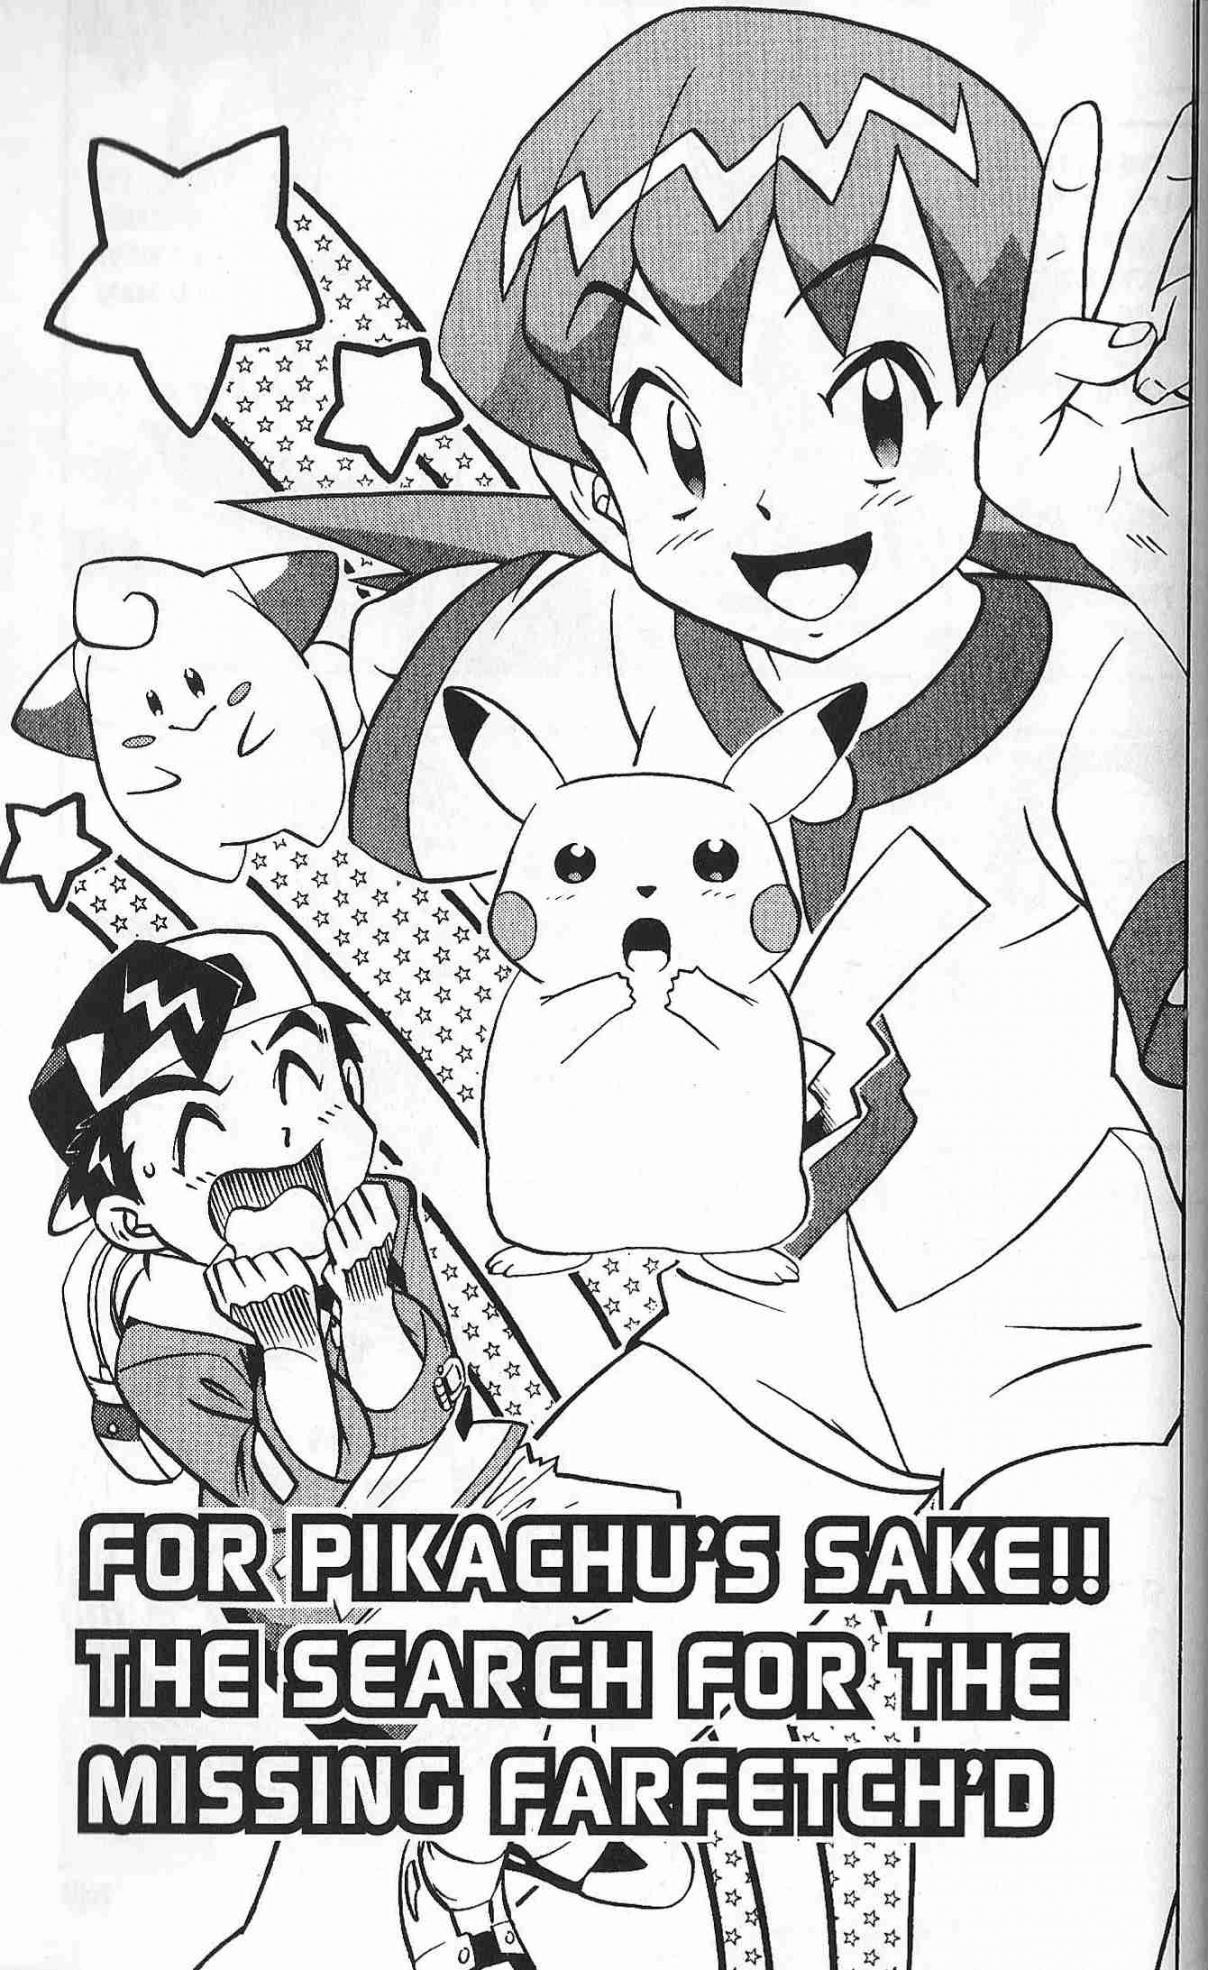 Pokémon Gold & Silver: The Golden Boys Vol. 1 Ch. 8 For Pikachu's Sake!! The Search for the Missing Farfetch'd